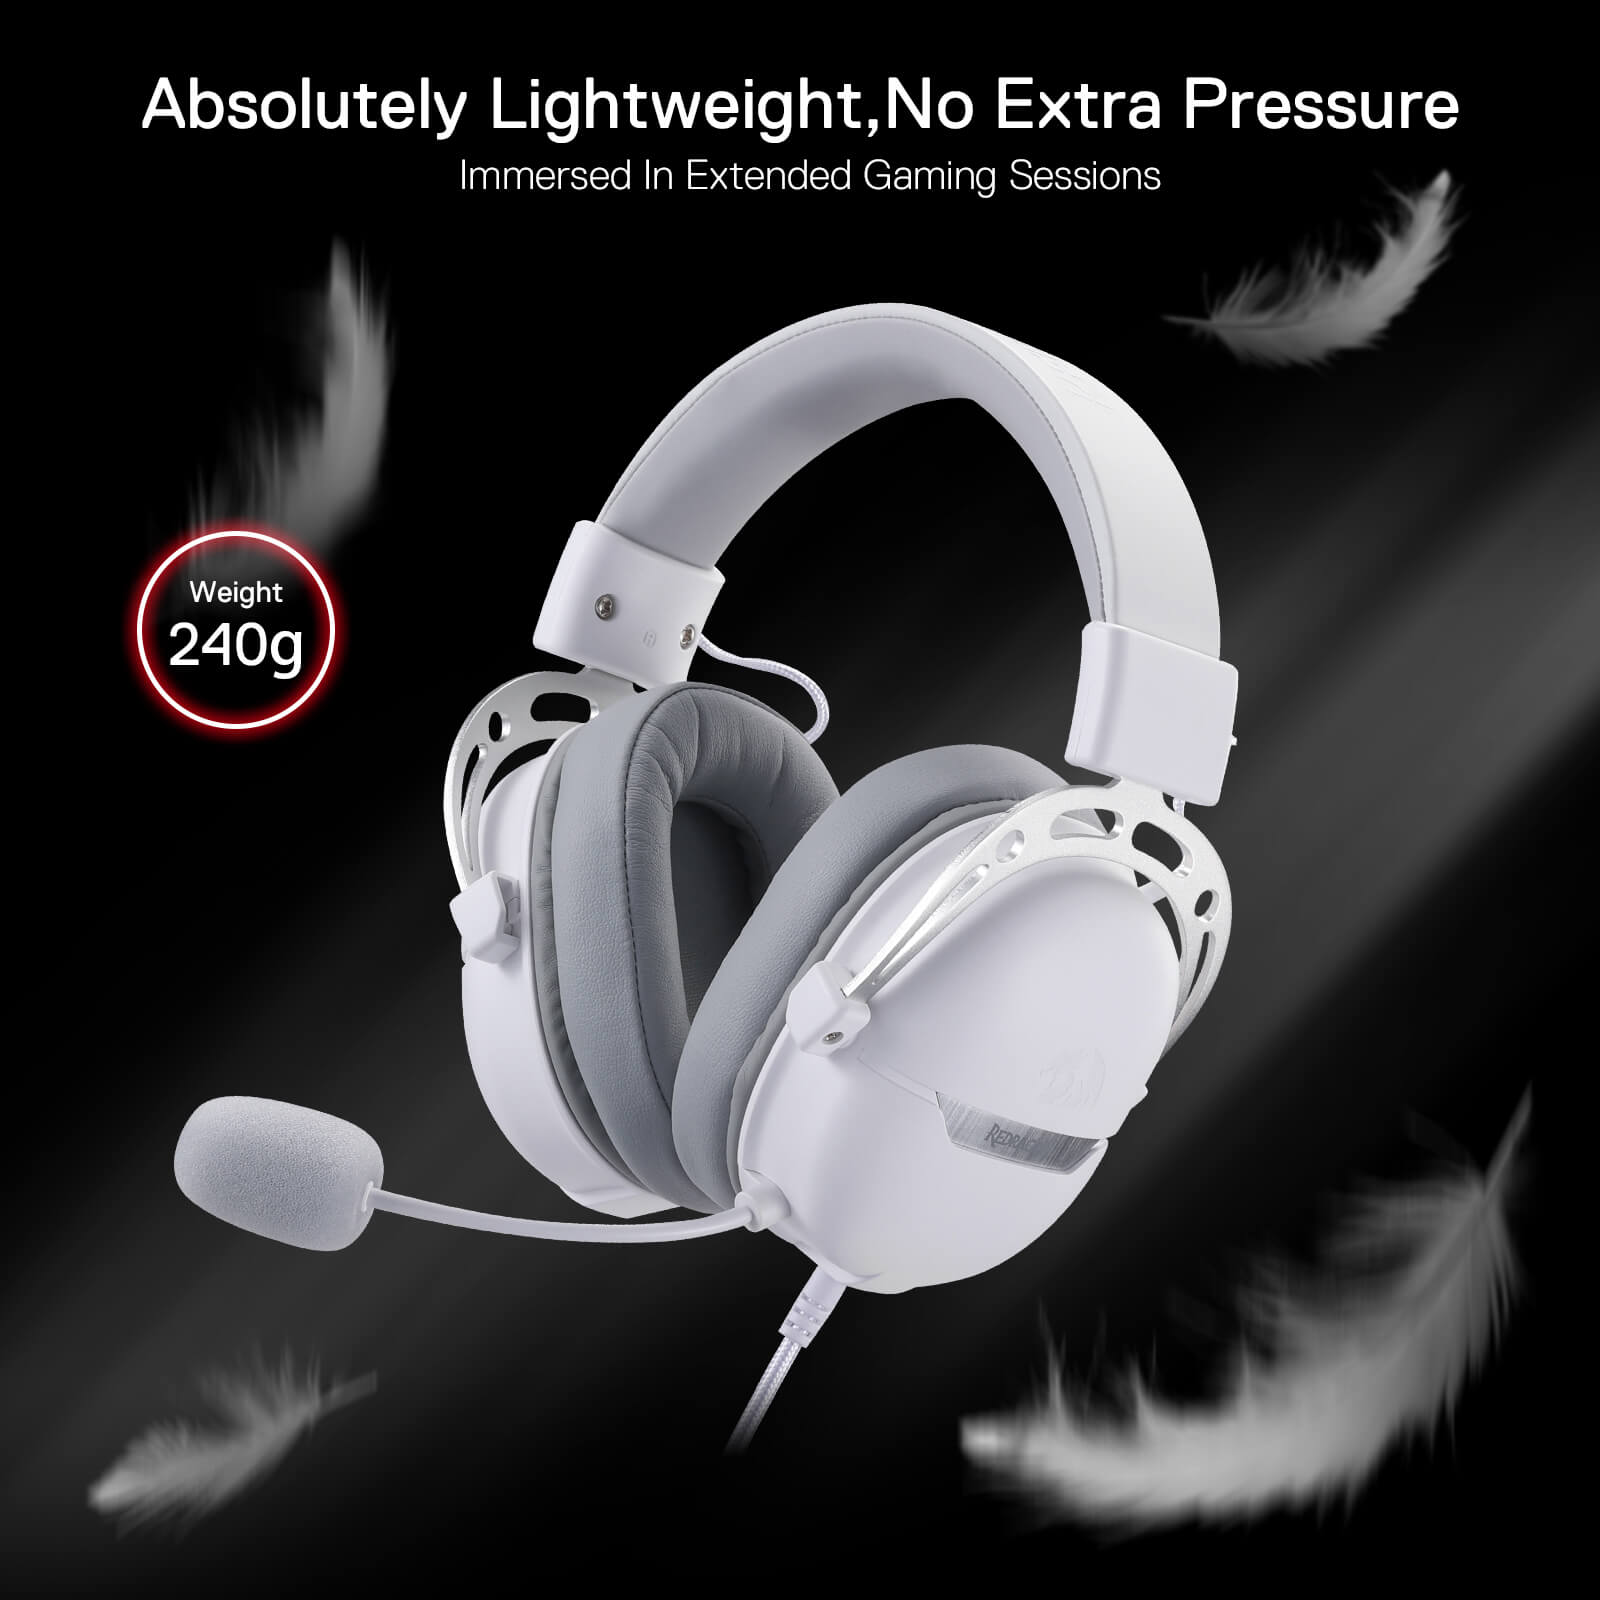 Redragon H376 Aurora Wired Gaming Headset, Virtual 7.1 Surround Sound, 40mm Drivers, in-line Control with EQ Mode, Over-Ear Headphones Works for PC/PS5/NS